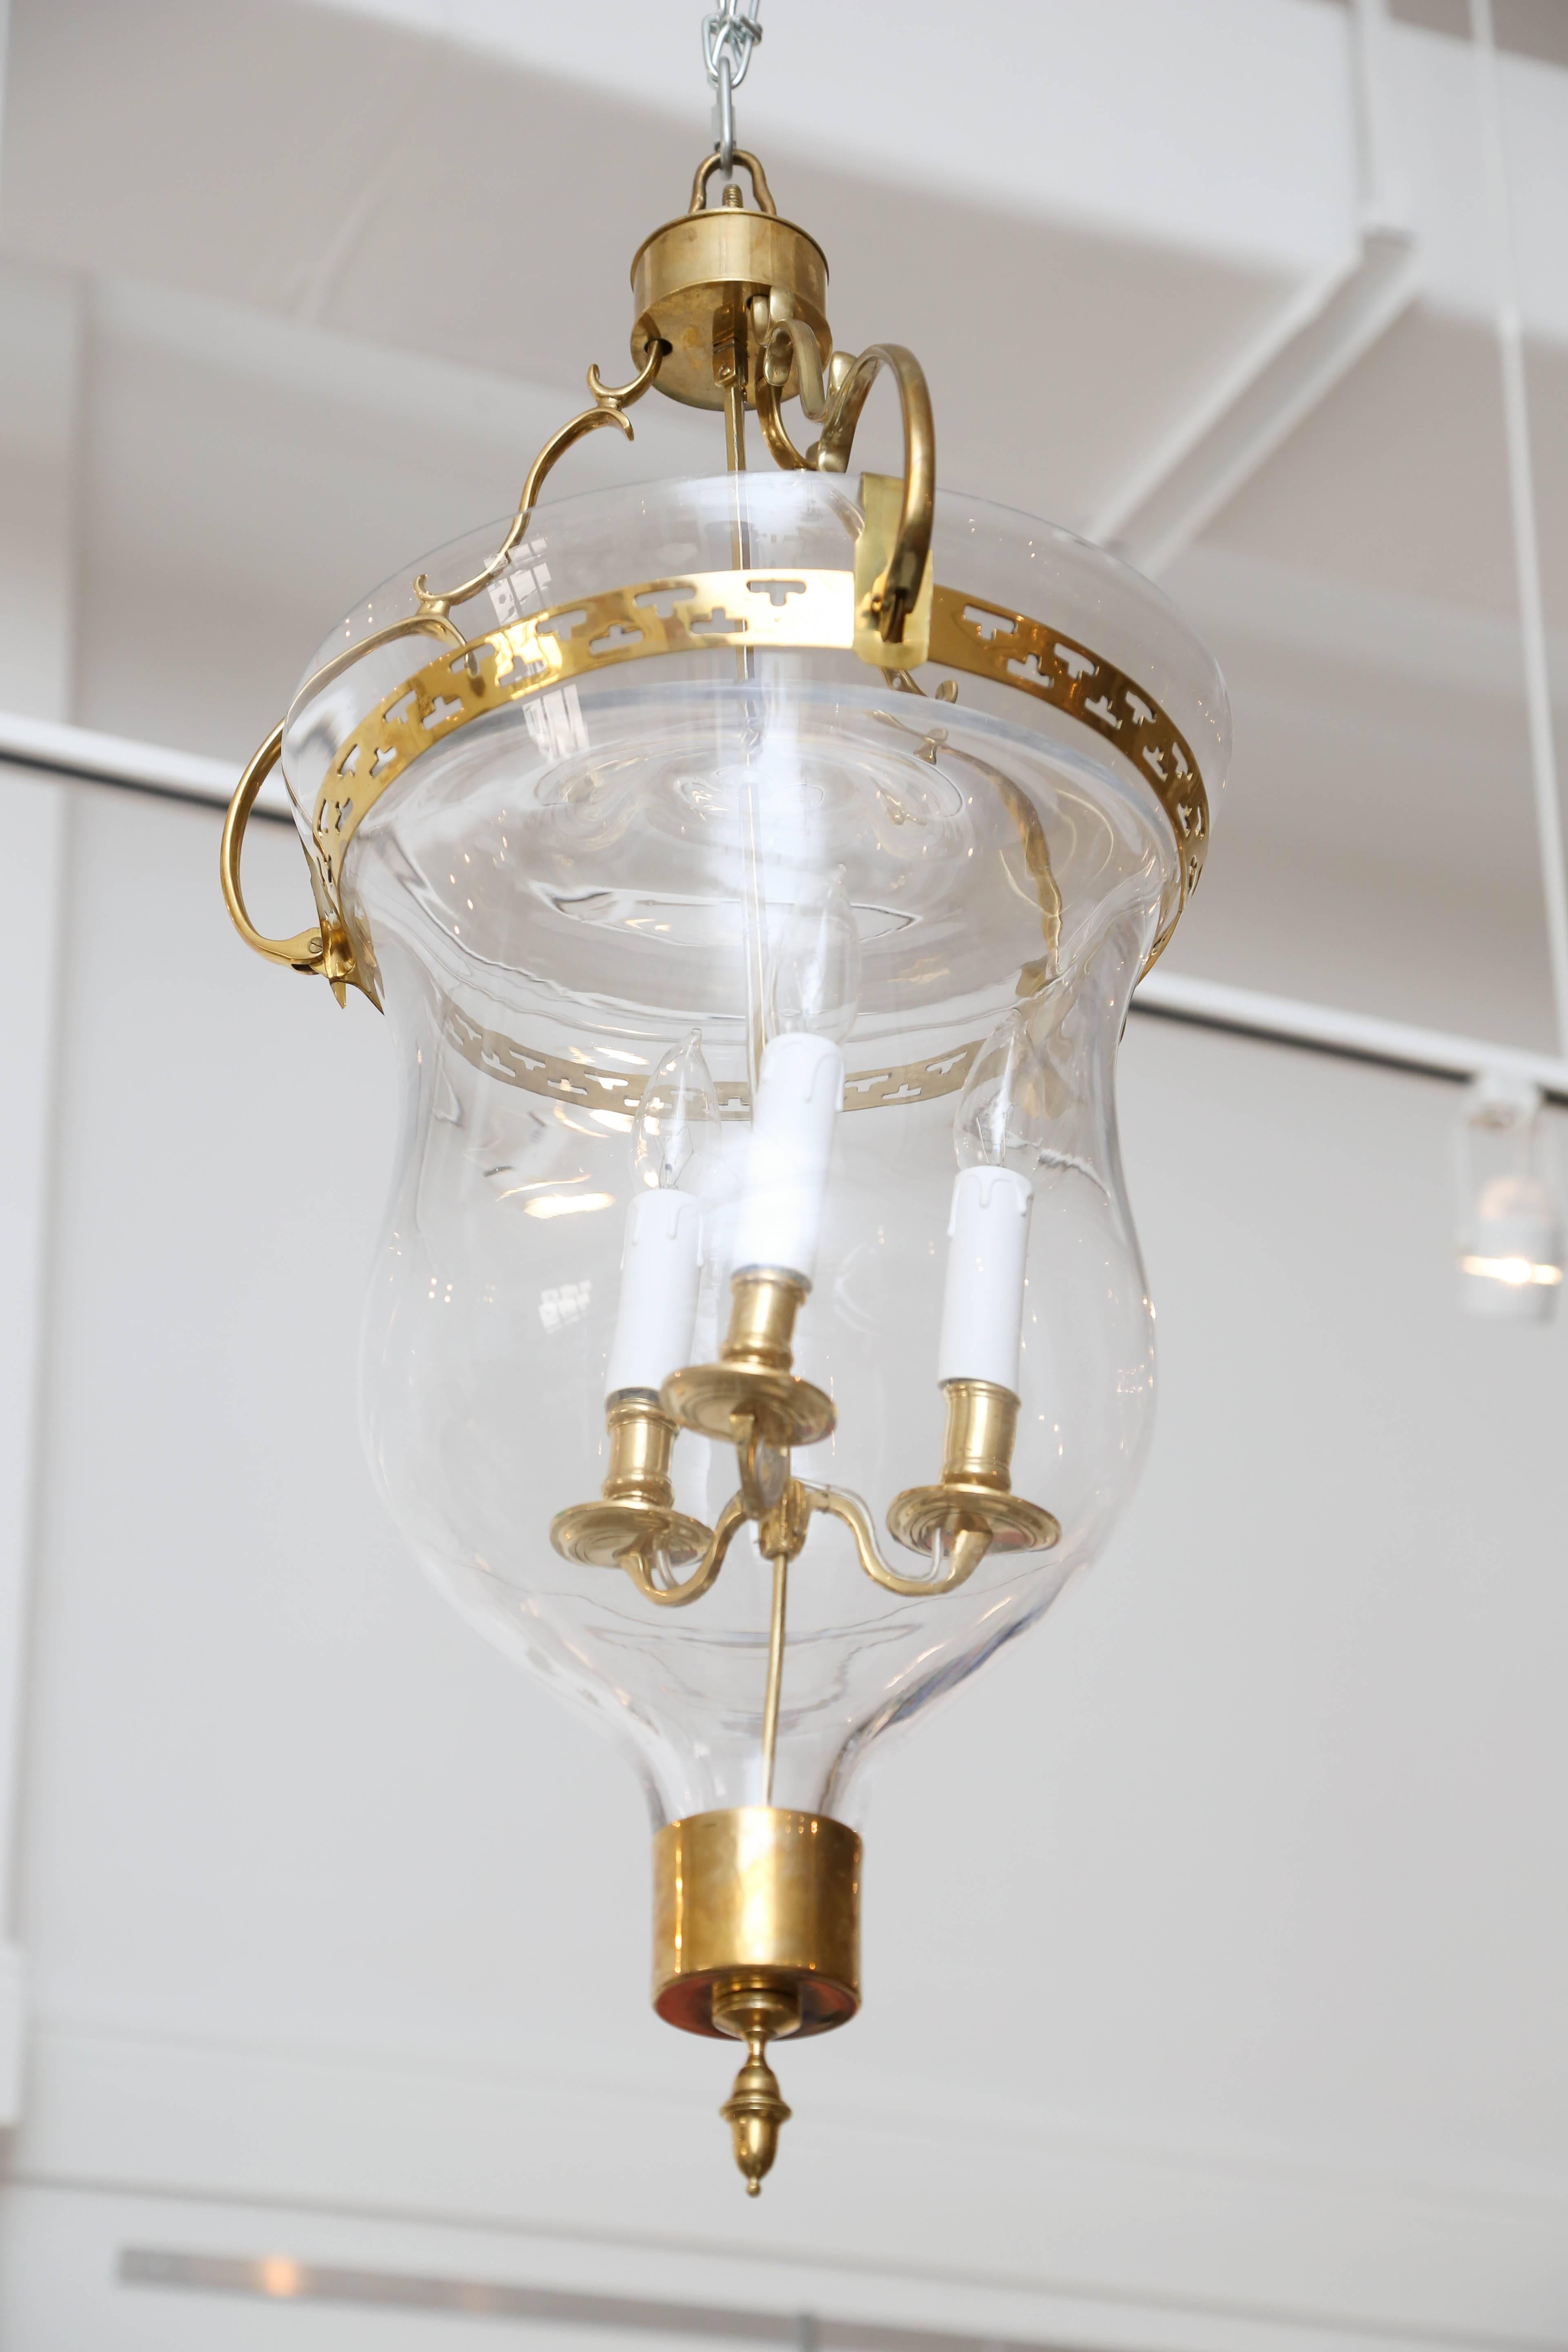 Gustavian style glass bell jar lantern with beautiful brass details
brass curved shaped arms attached to a pierced ring hold the glass bell jar, a
center stem has three arms for wired candle fixtures. Brass base and finial on the bottom. Fixture has